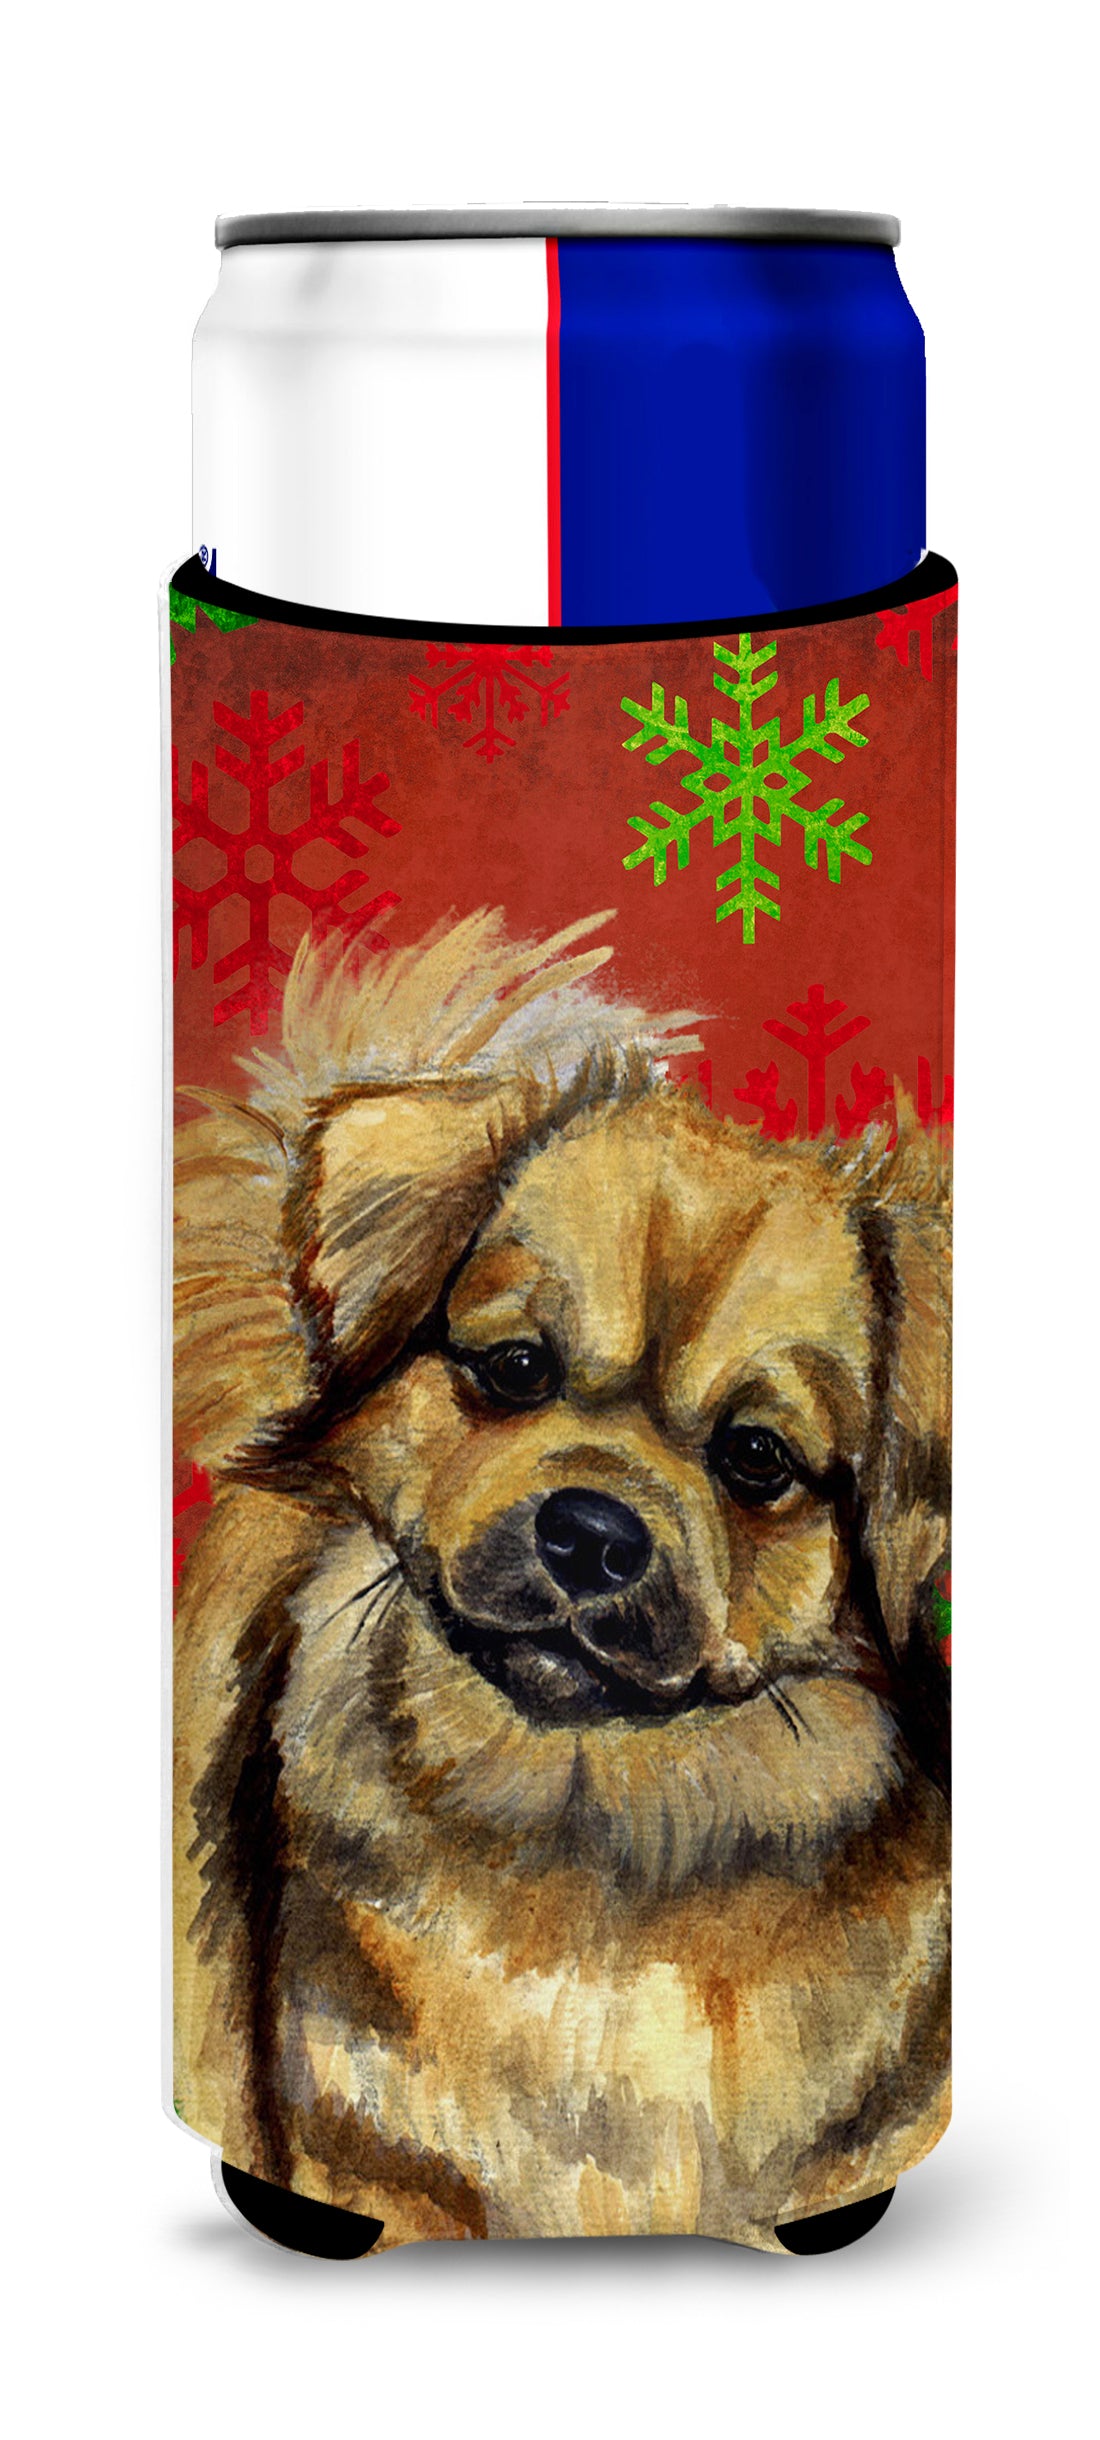 Tibetan Spaniel Red Green Snowflake Holiday Christmas Ultra Beverage Insulators for slim cans LH9349MUK